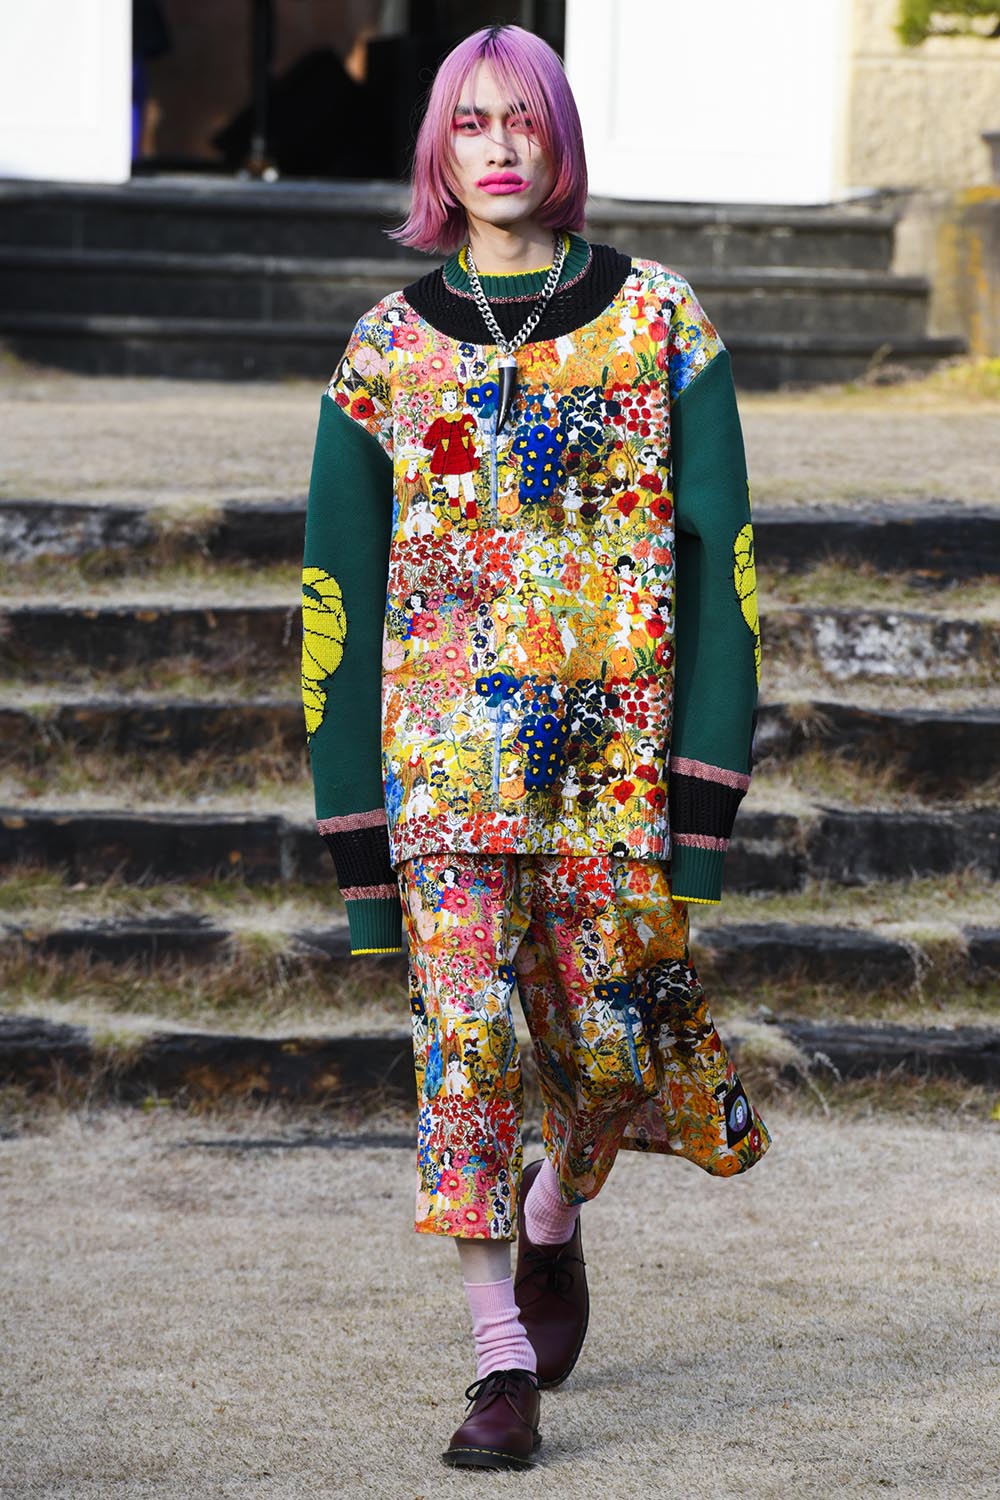 Kidill Autumn/Winter 22-23 The Outsider | Fashion Week Online®